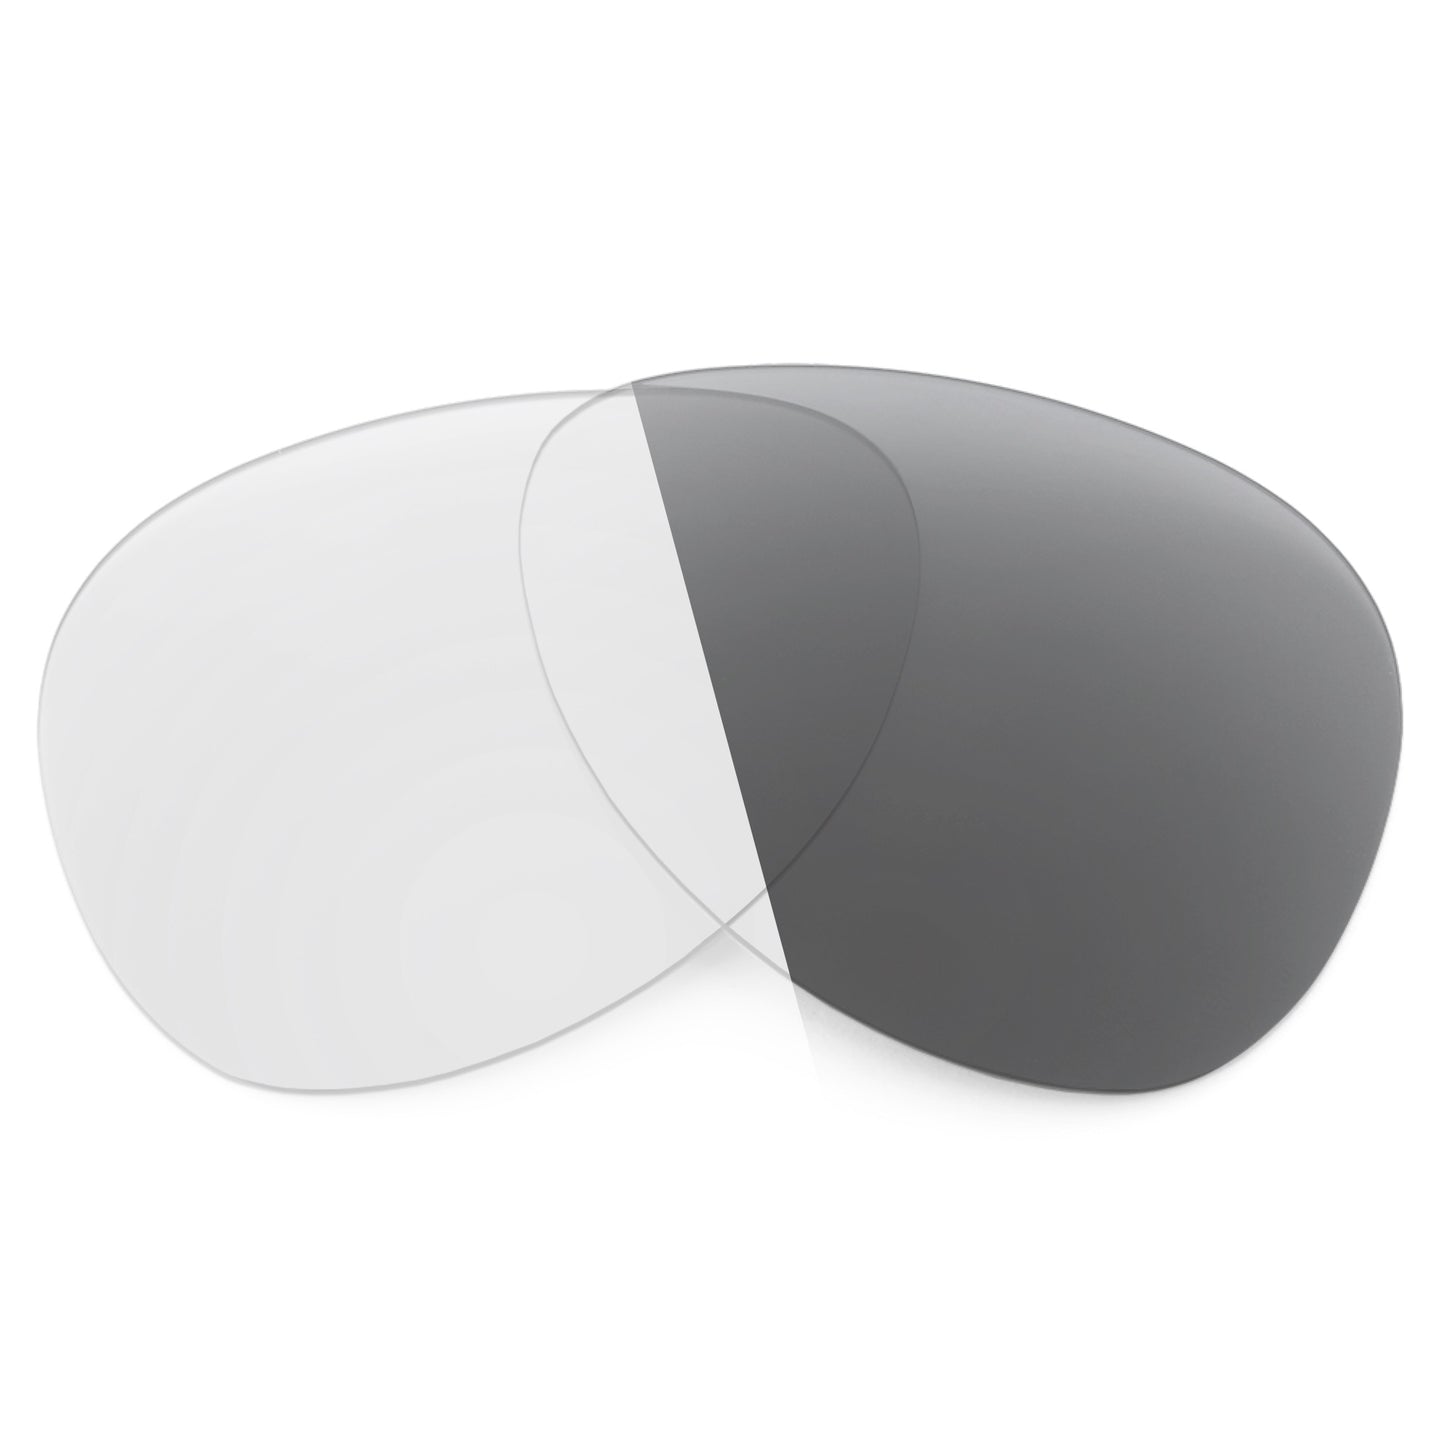 Revant replacement lenses for Ray-Ban Aviator RB3025 58mm Non-Polarized Adapt Gray Photochromic